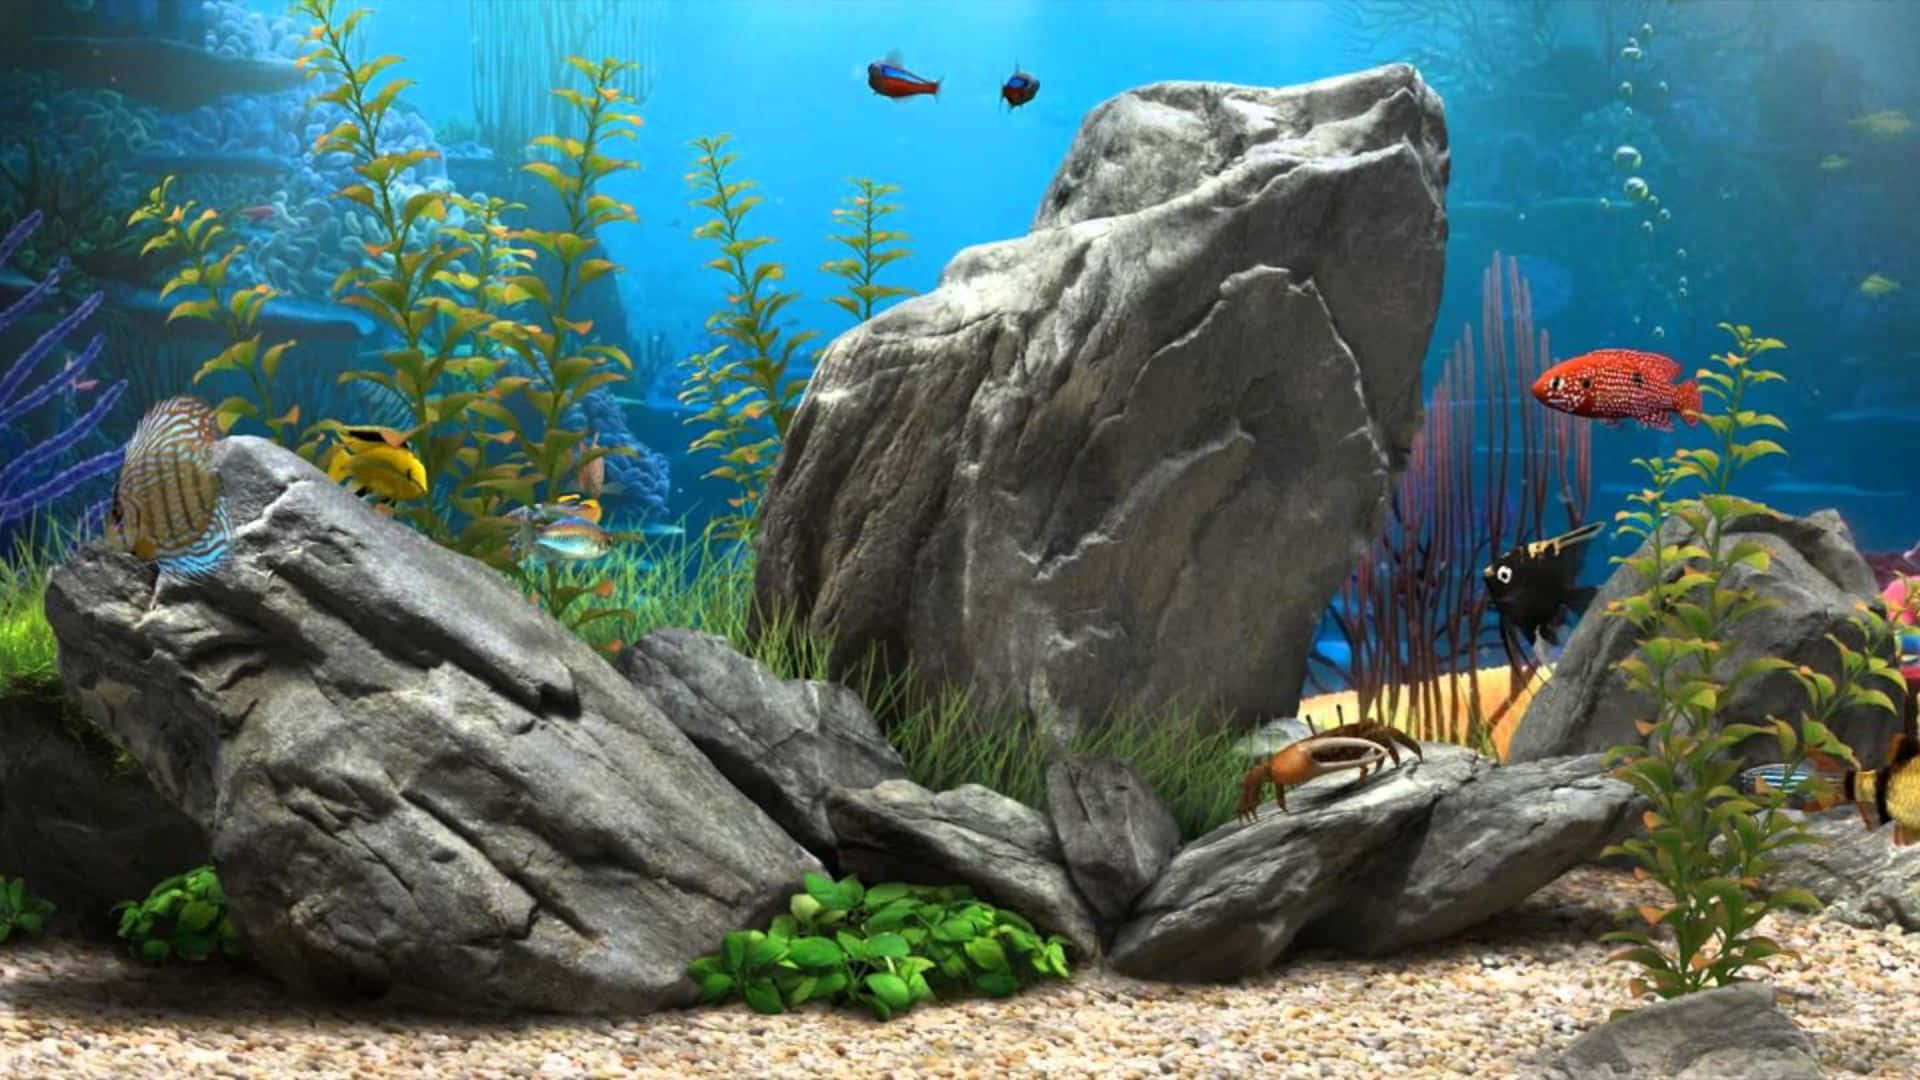 Colorful Tropical Fish Delightfully Swim in a 3D Fish Tank